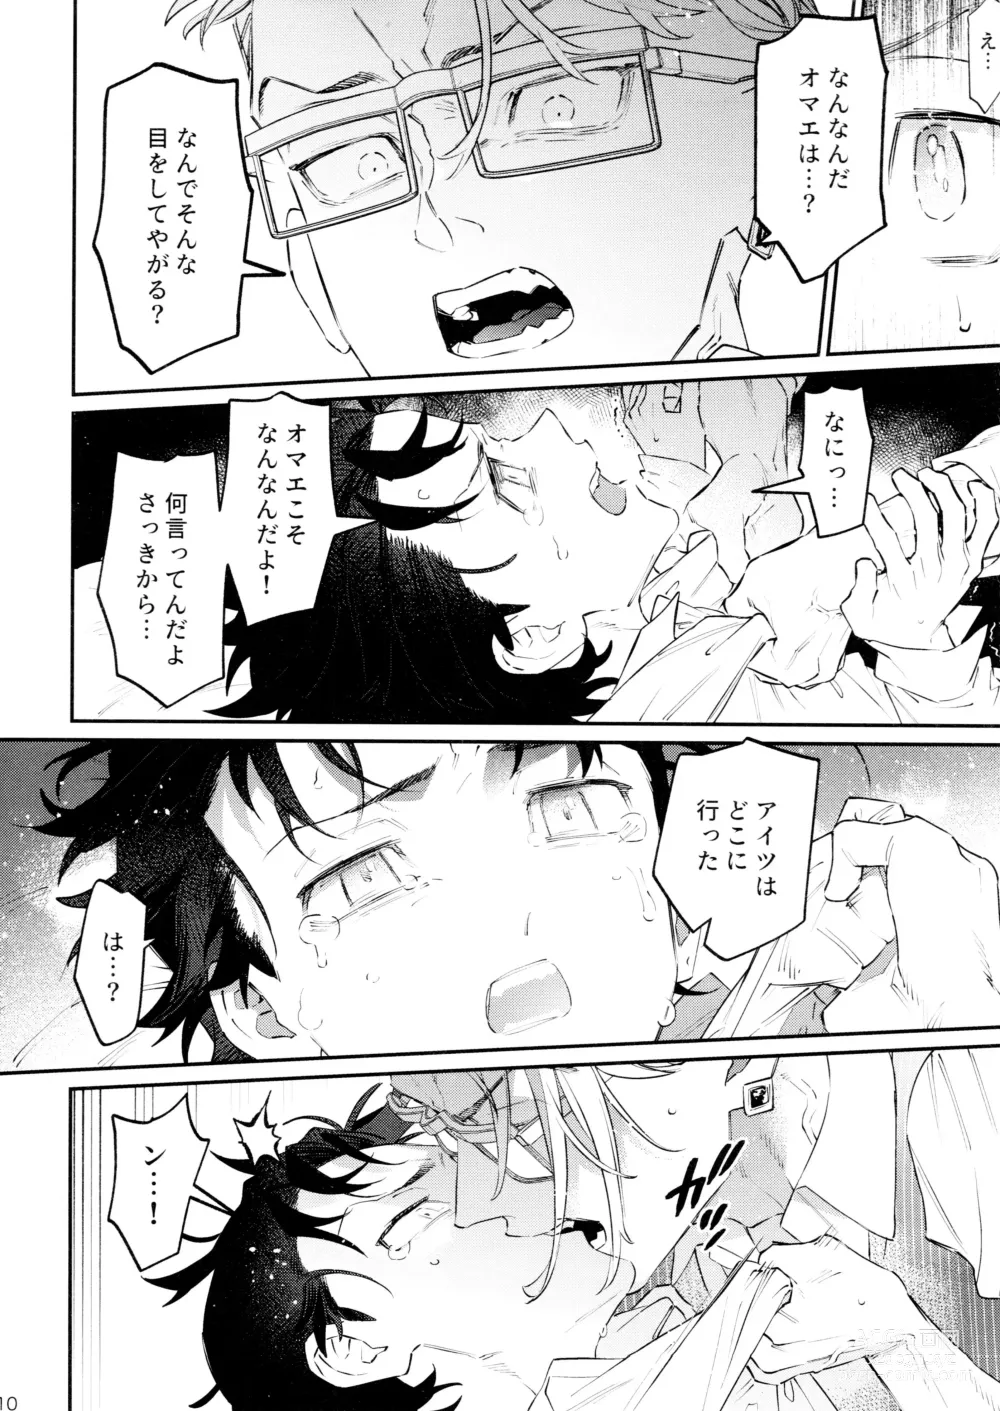 Page 10 of doujinshi ROOSTER